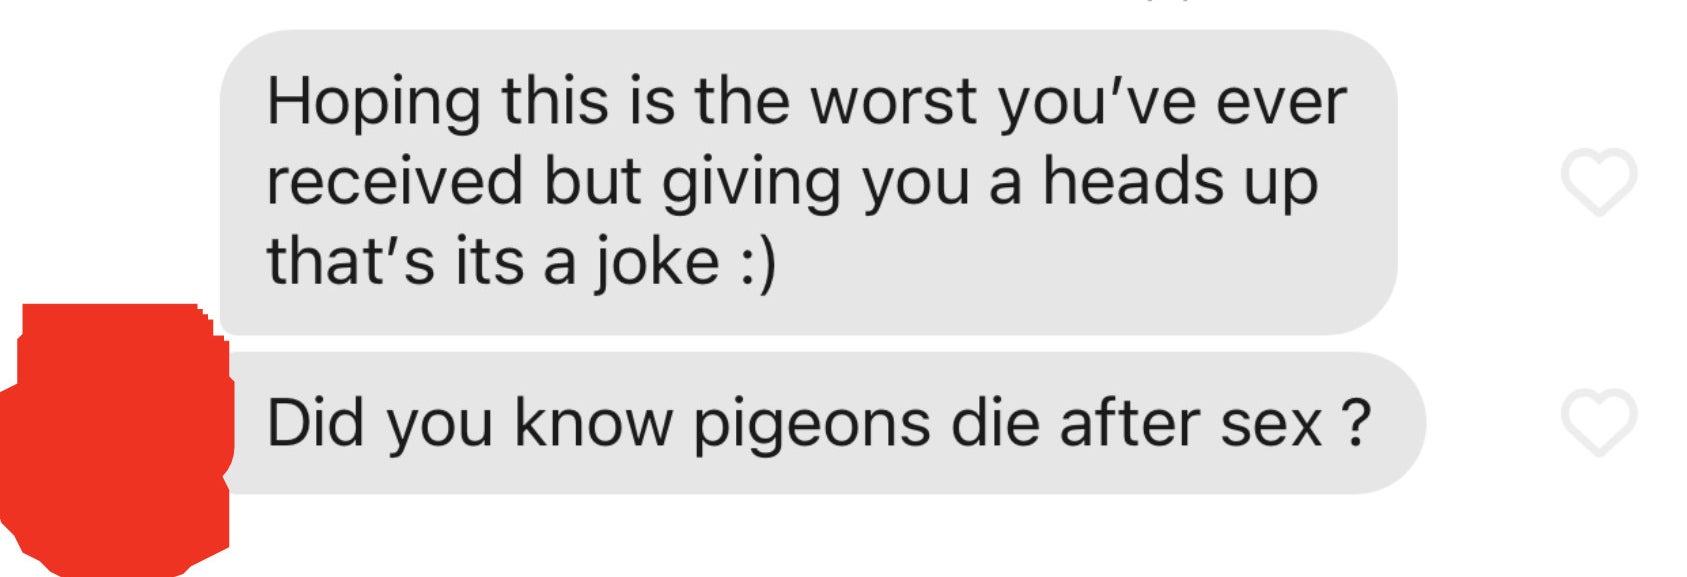 Hoping this is the worst you&#x27;ve ever received but giving you a heads up that it&#x27;s a joke :) Did you know pigeons die after sex?